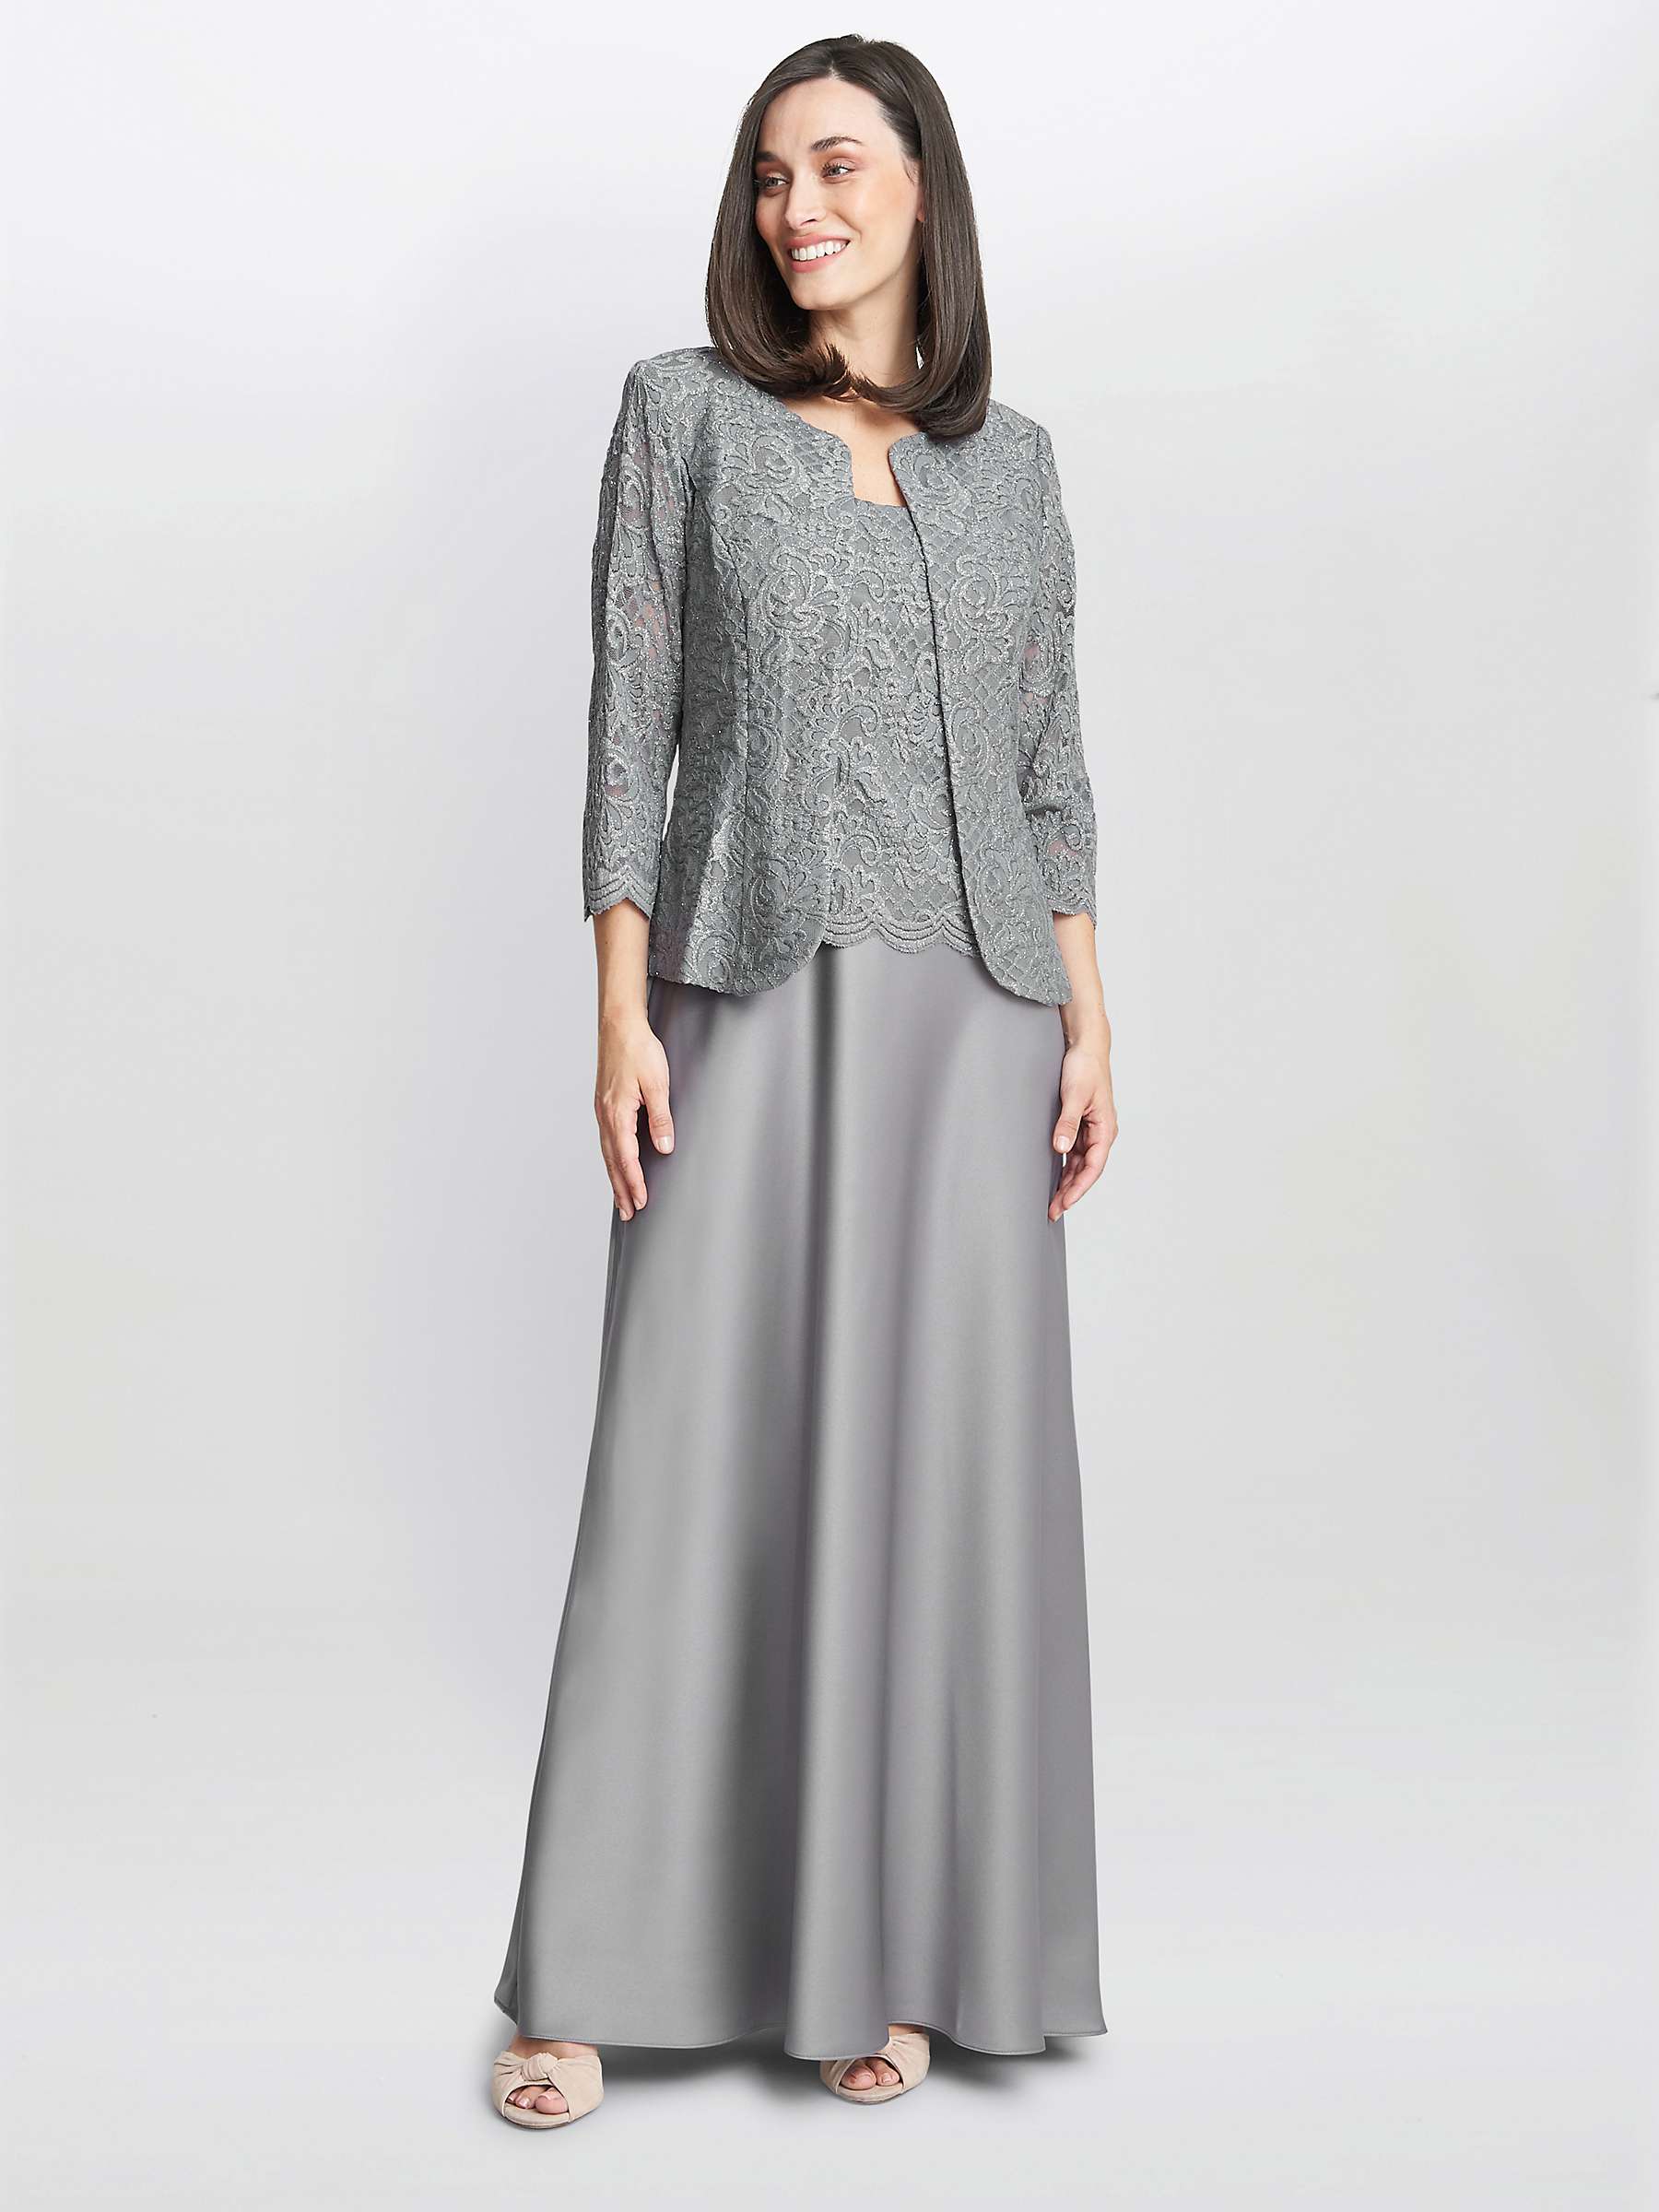 Buy Gina Bacconi Adriana Lace And Satin Dress And Jacket, Ink Online at johnlewis.com